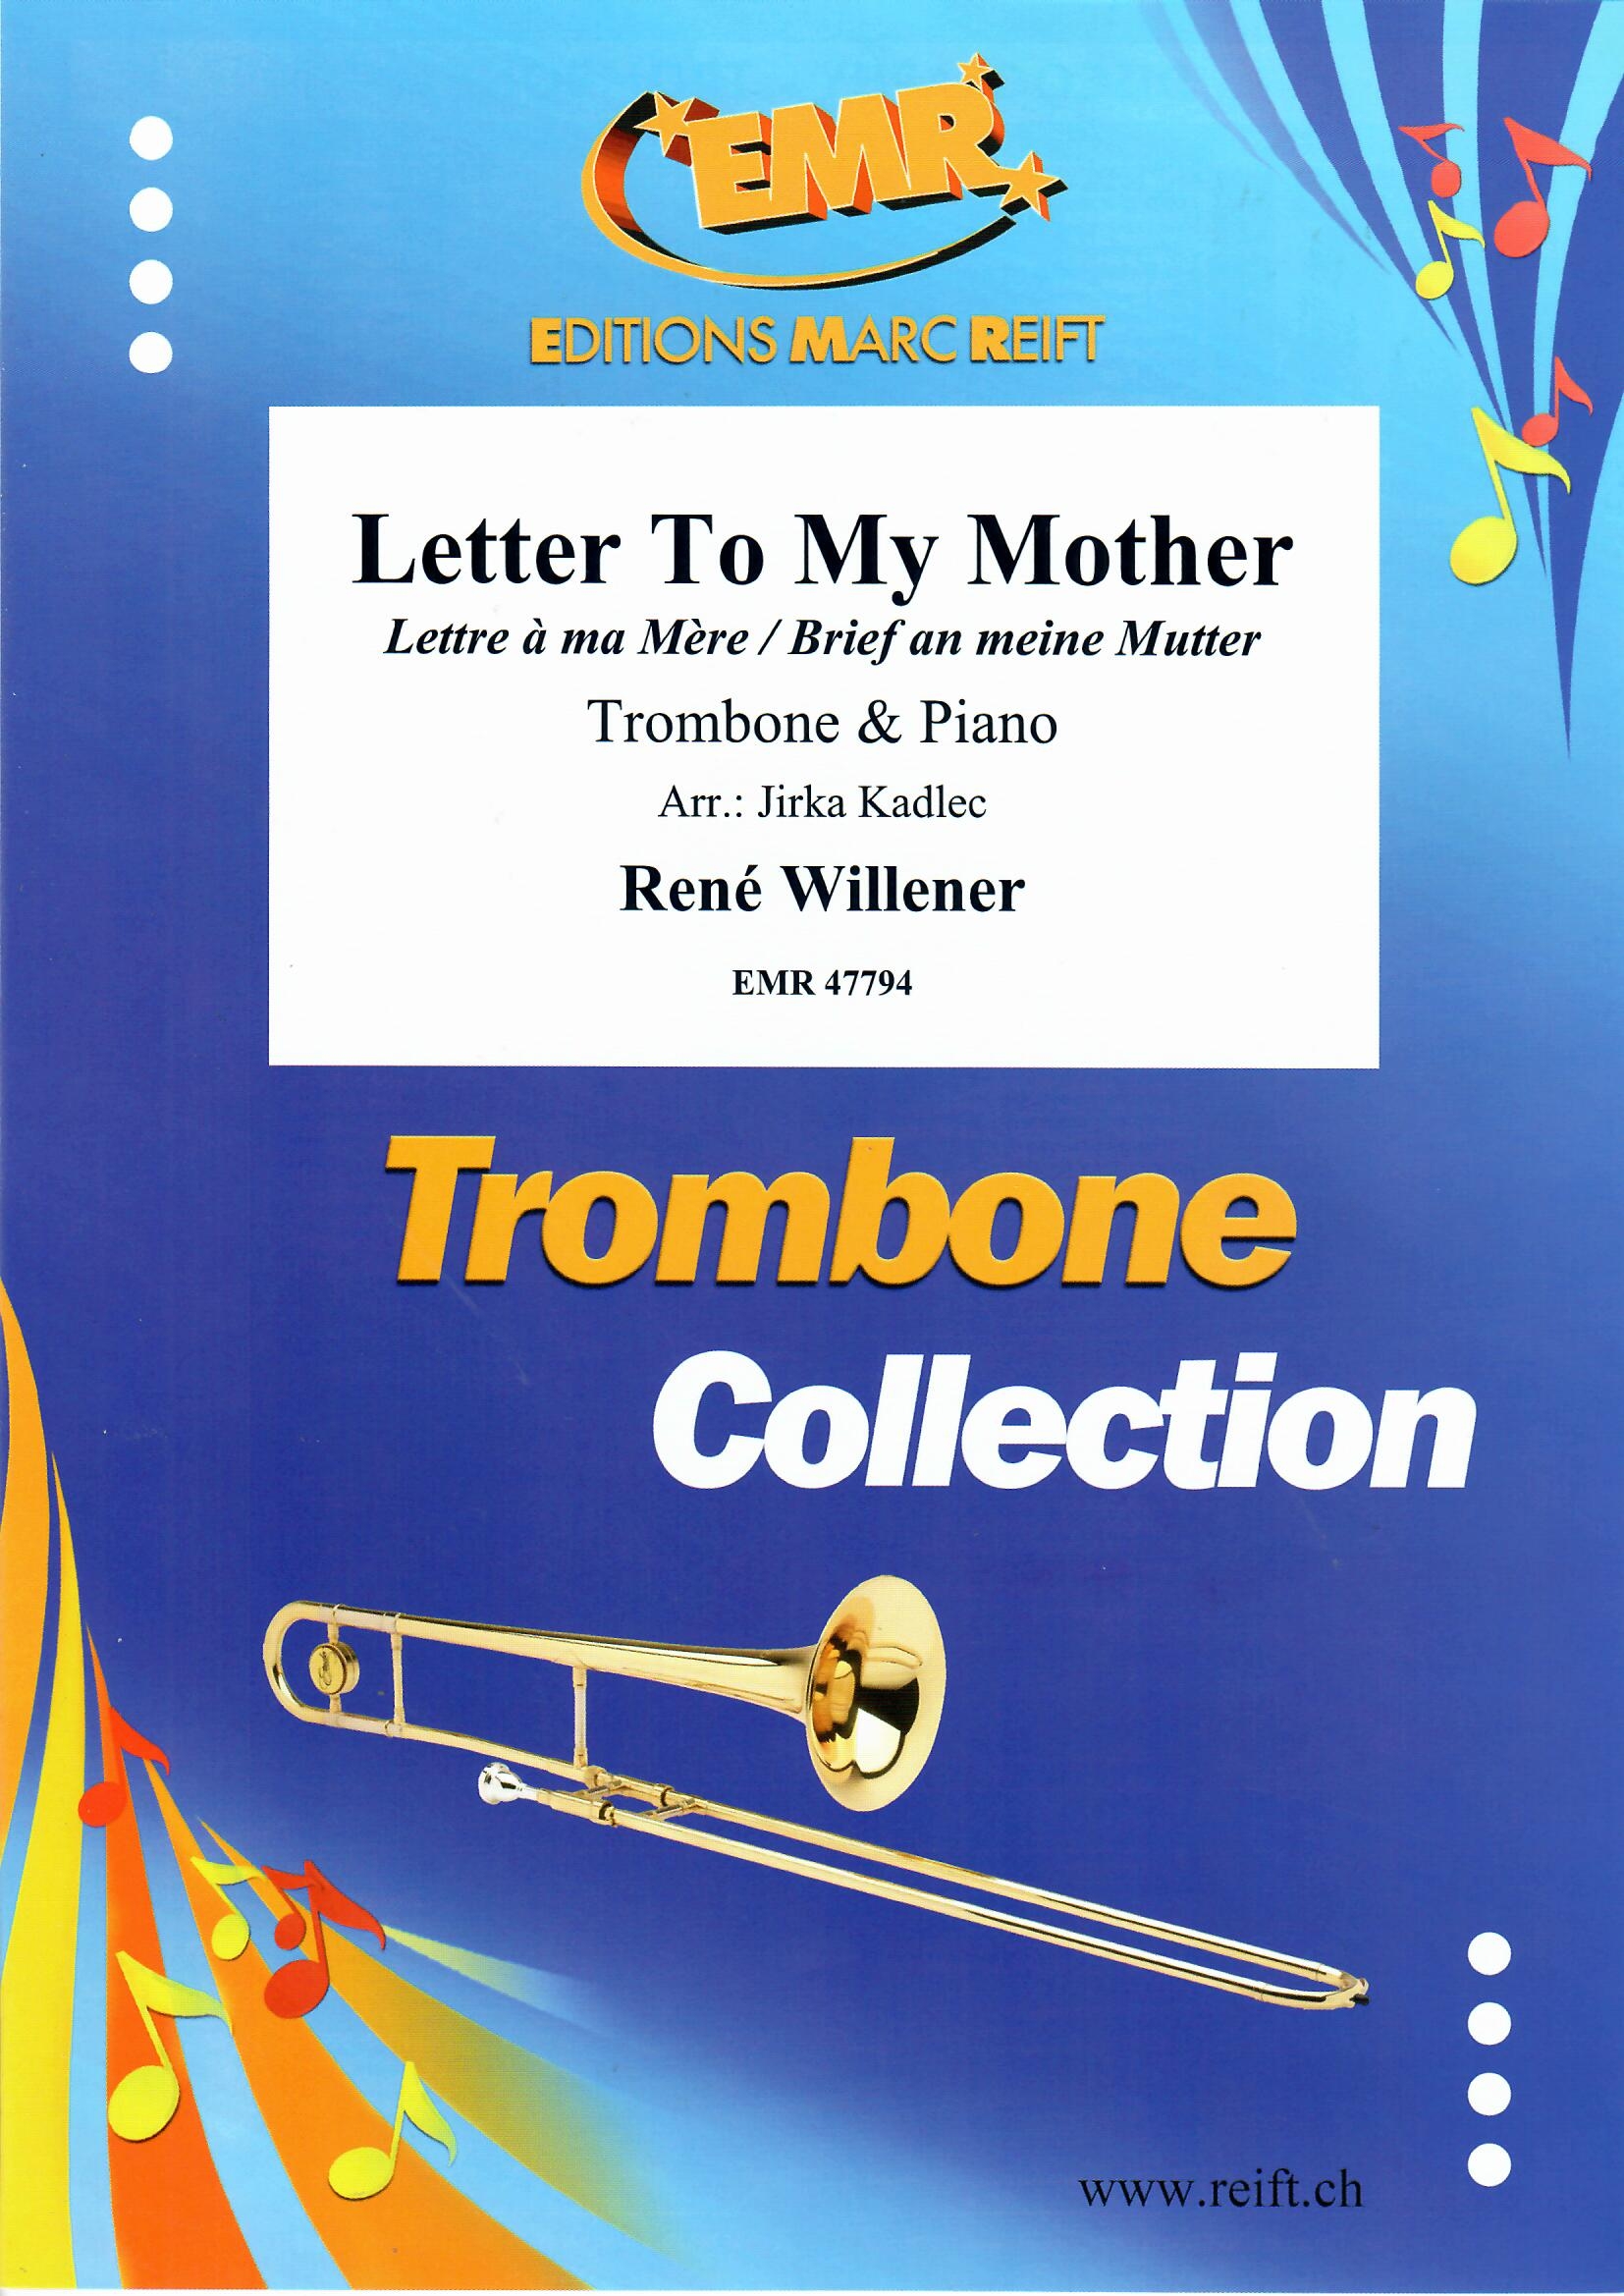 LETTER TO MY MOTHER - Trombone & Piano, SOLOS - Trombone